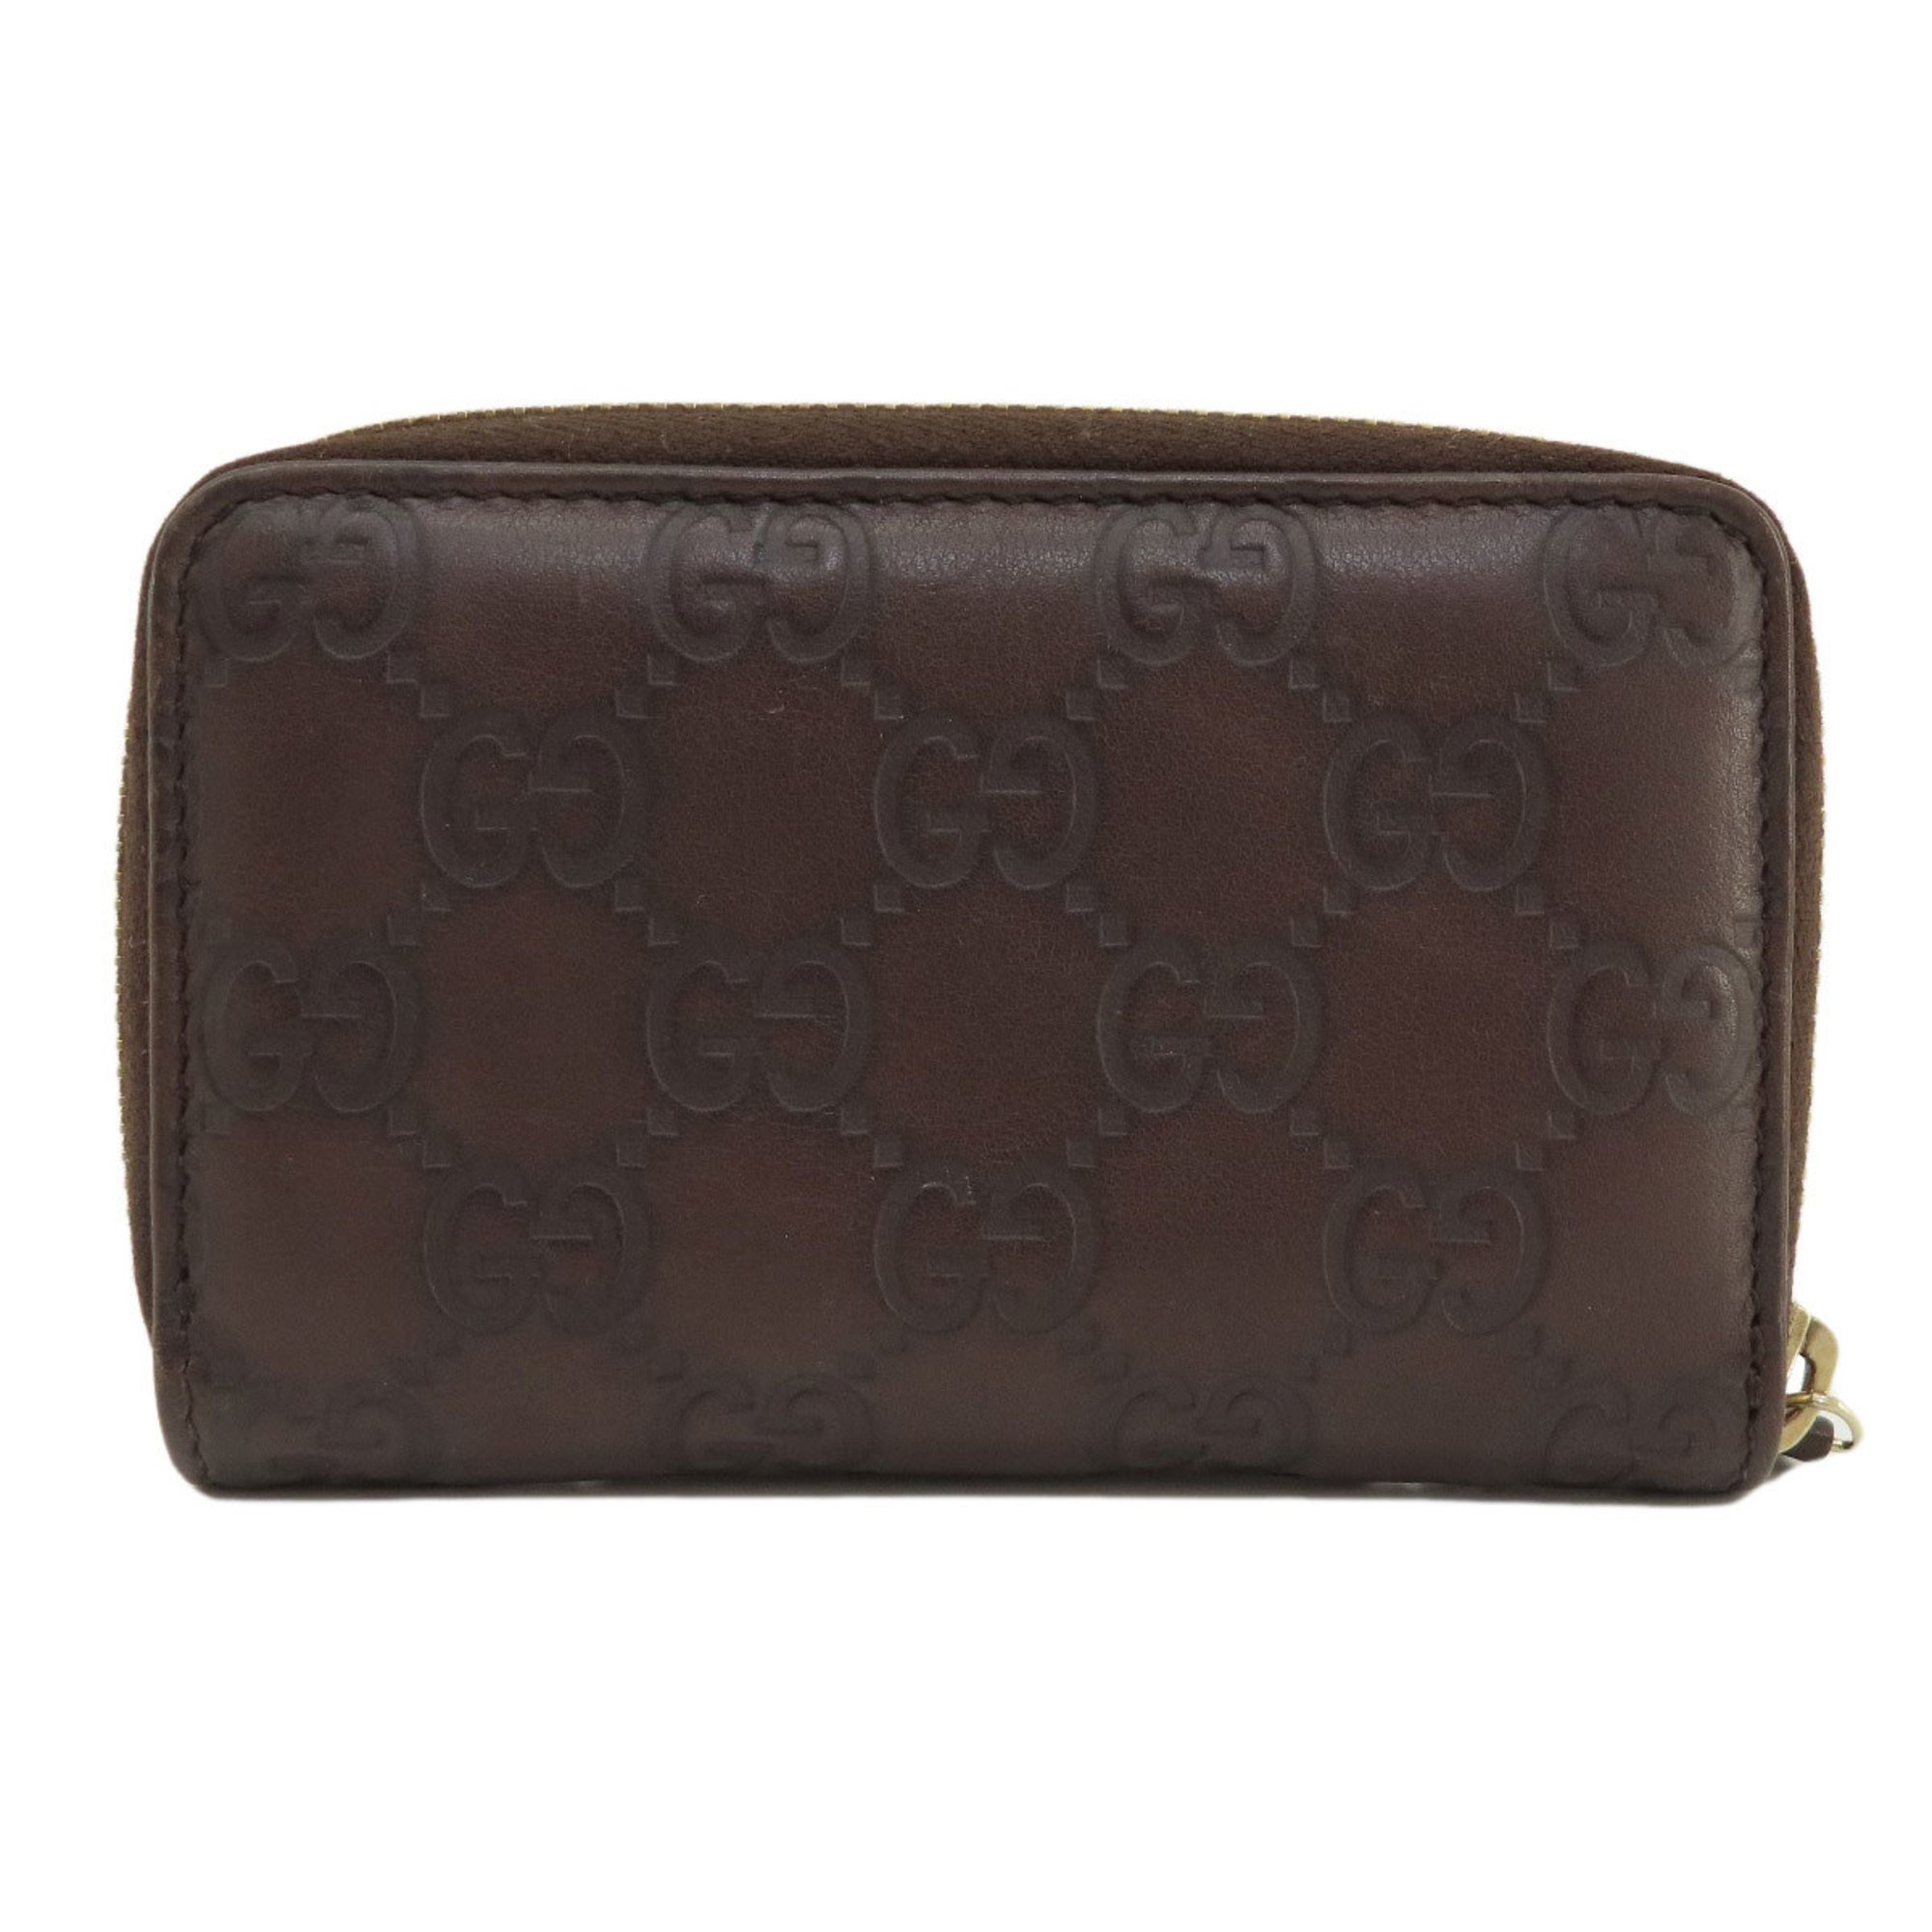 Gucci 255452 Guccissima GG pattern wallet/coin case leather ladies